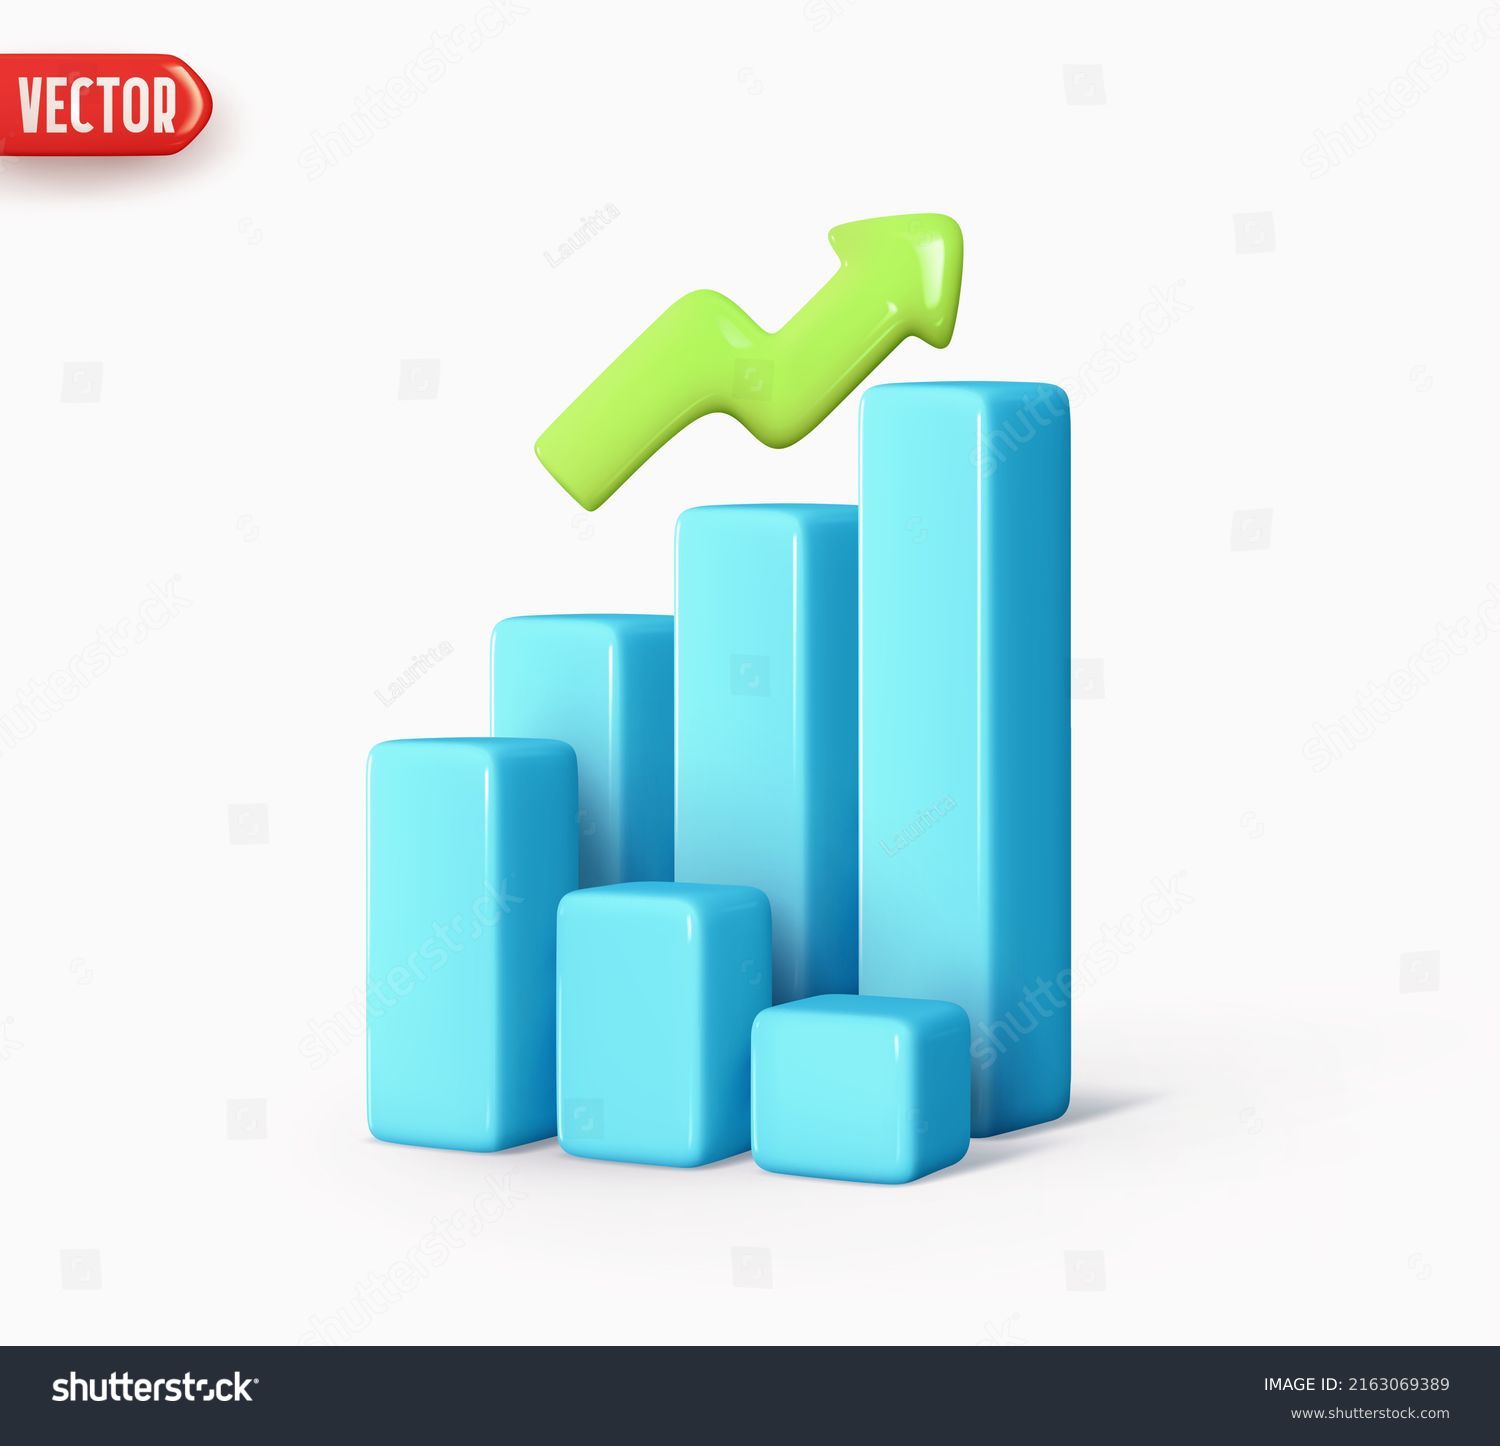 SVG of Dynamics of course online graphics. Trade arrow. Exchange price chart. Realistic 3d design. Growth and changes in value. Exchange trading. Reporting annual and quarterly profits. vector illustration svg